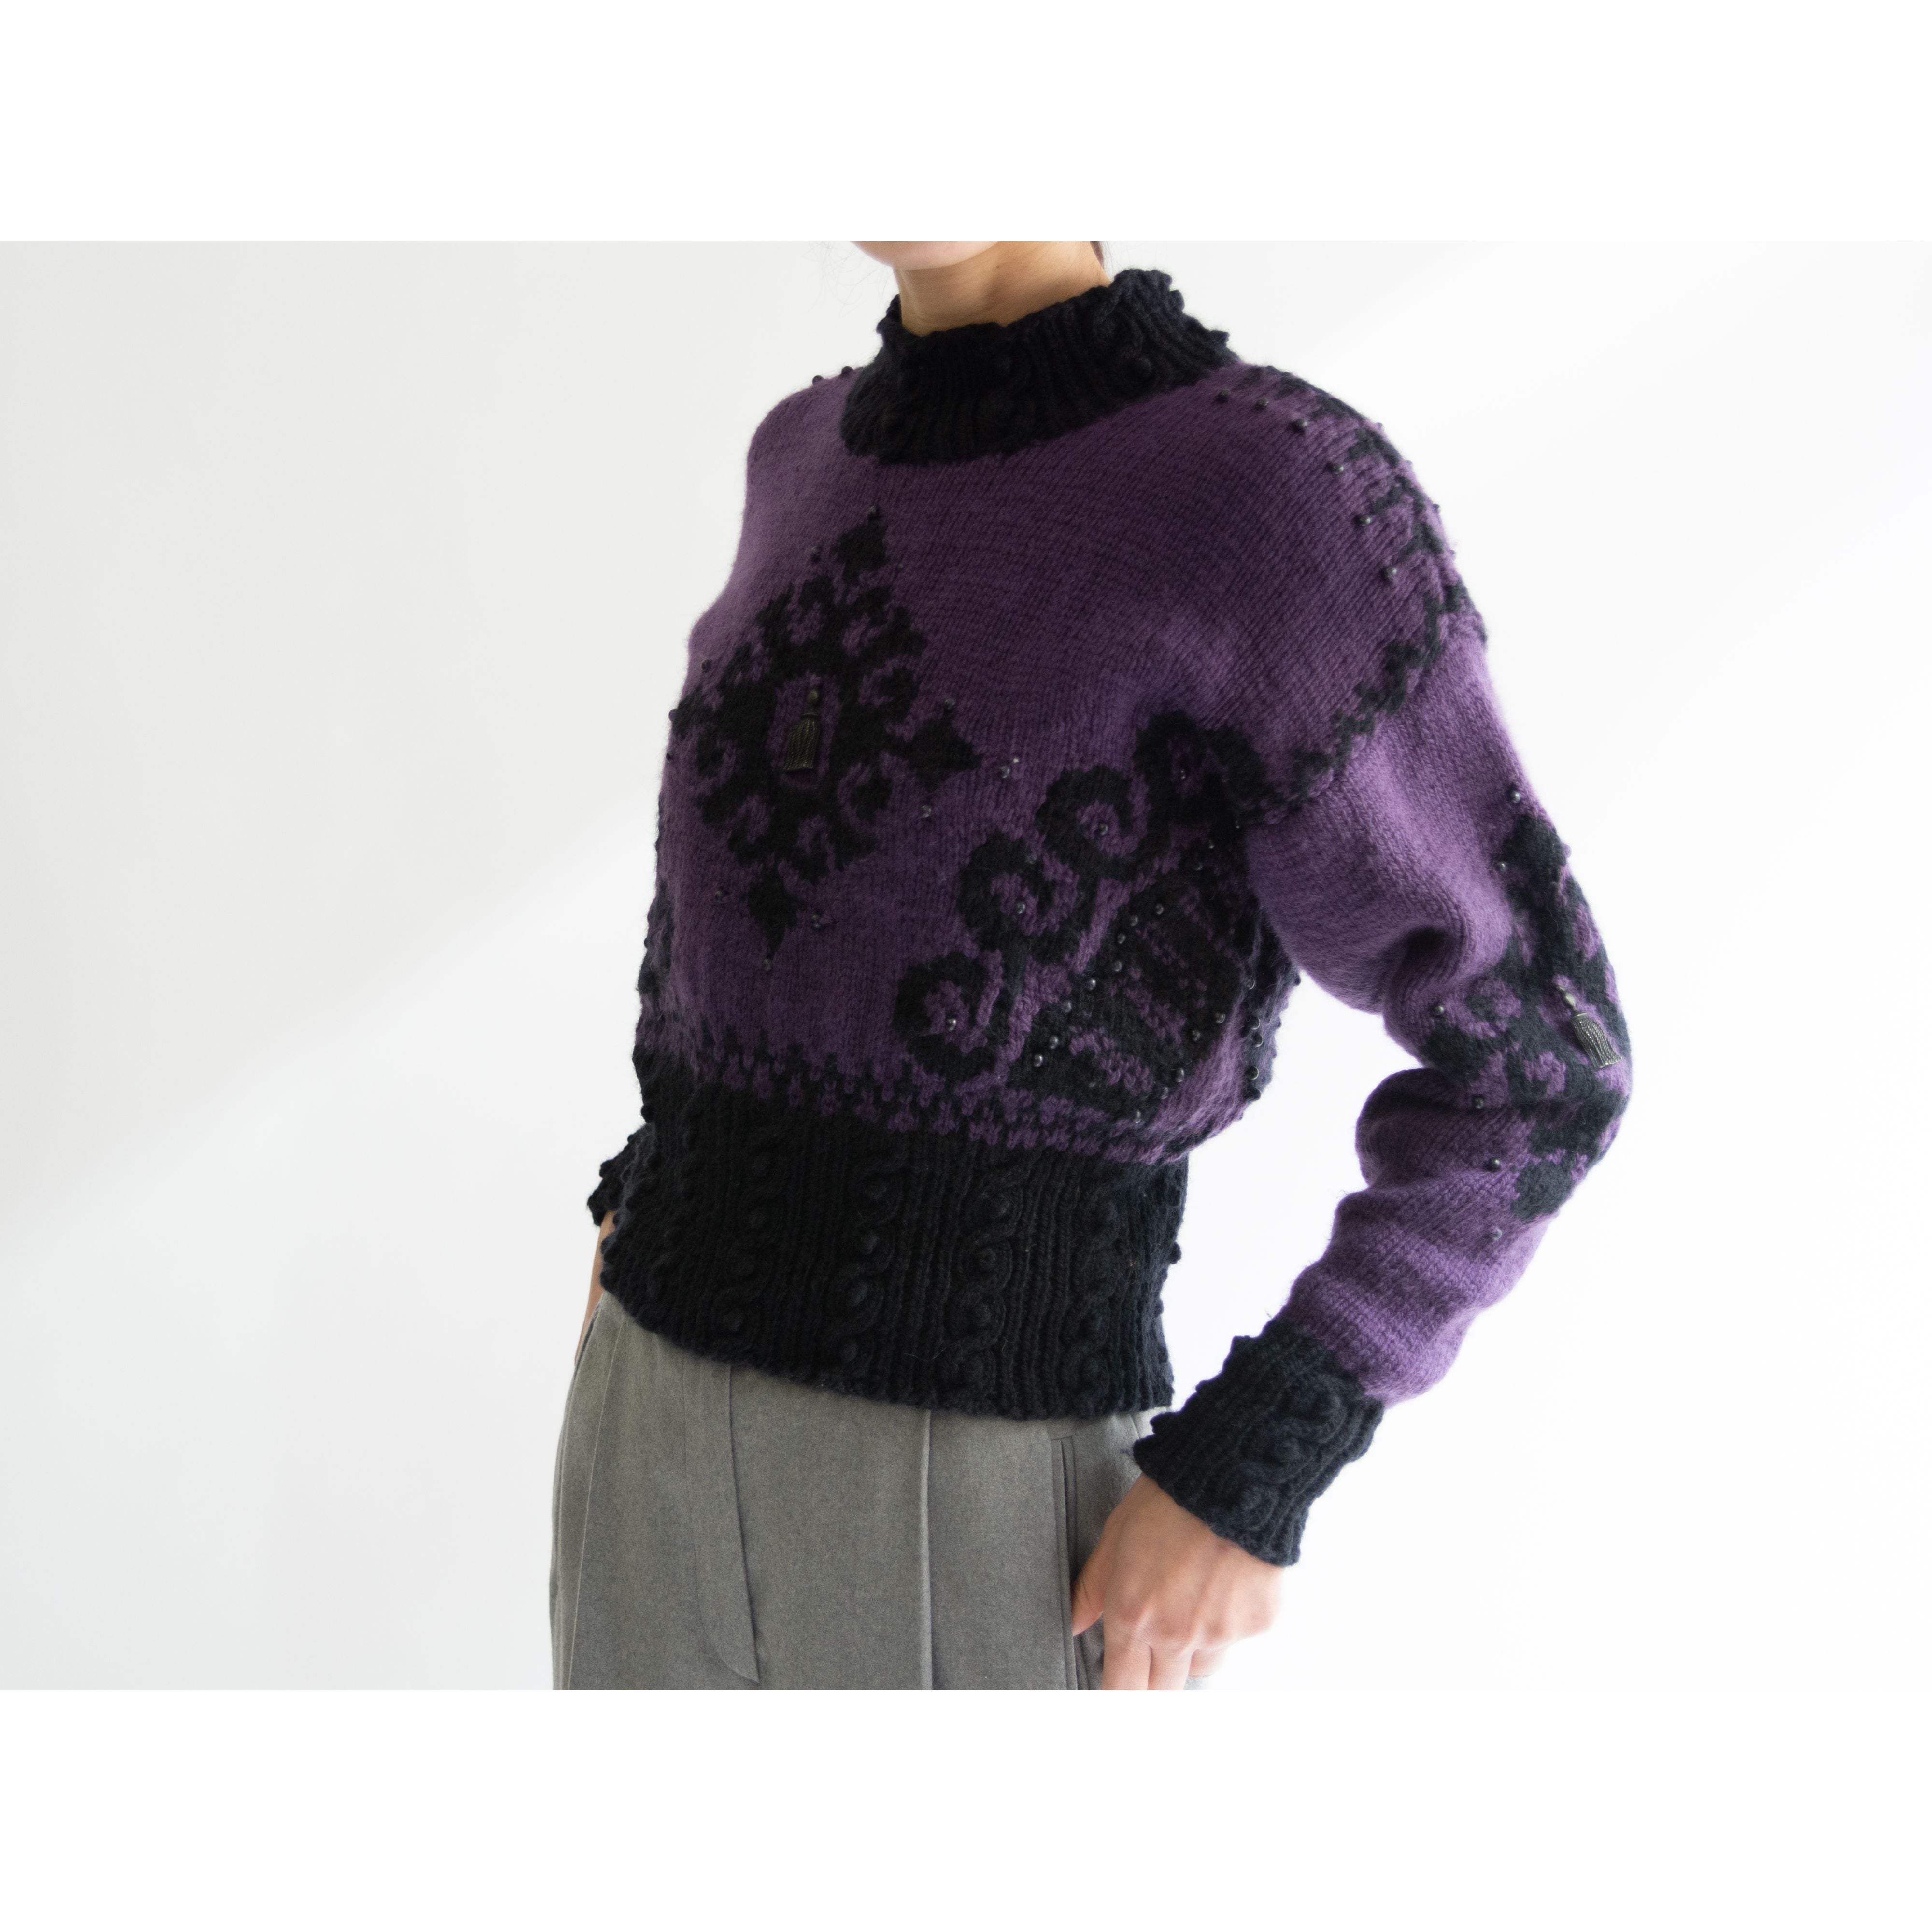 Artwork LONDON】Hand Knitted in England 80-90's 100% Wool Sweater